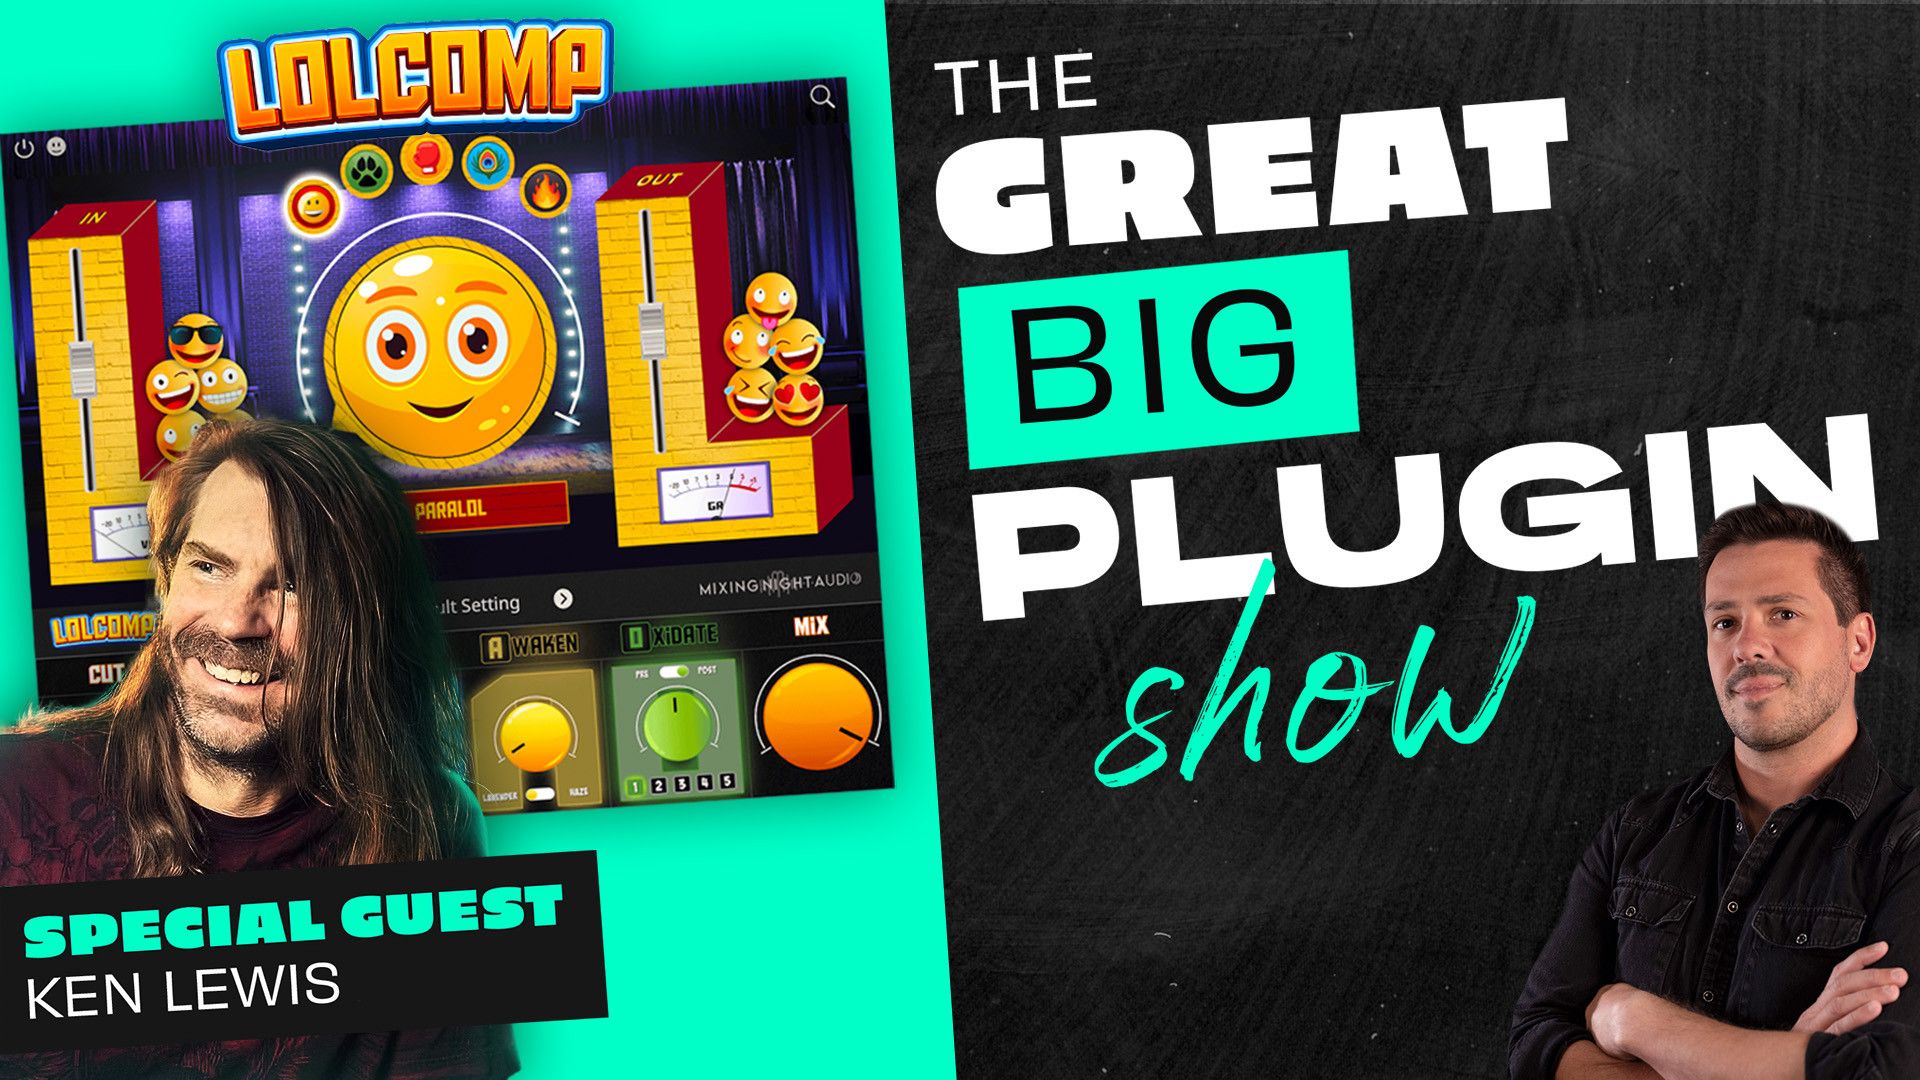 The Great Big Plugin Show ft. Ken Lewis - LOLCOMP #2